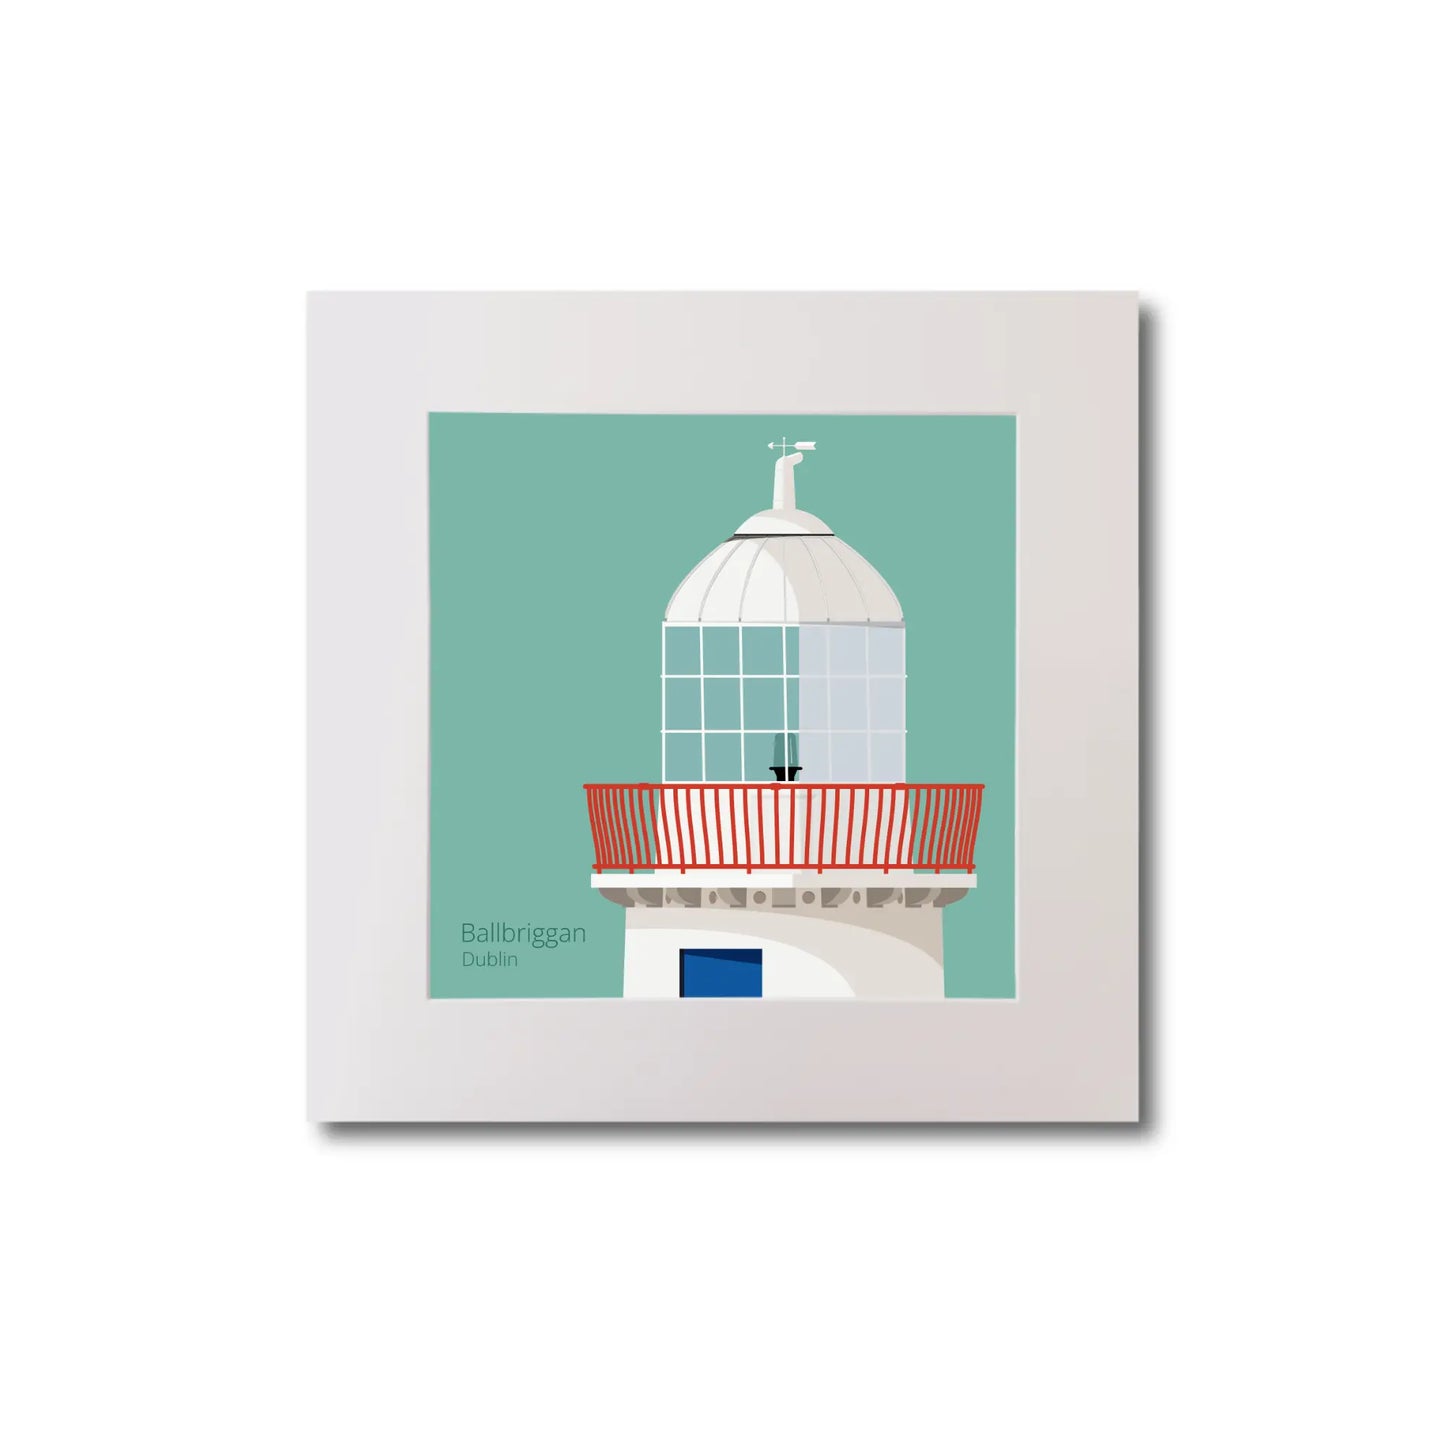 Illustration Ballbriggan lighthouse on an ocean green background, mounted and measuring 20x20cm.